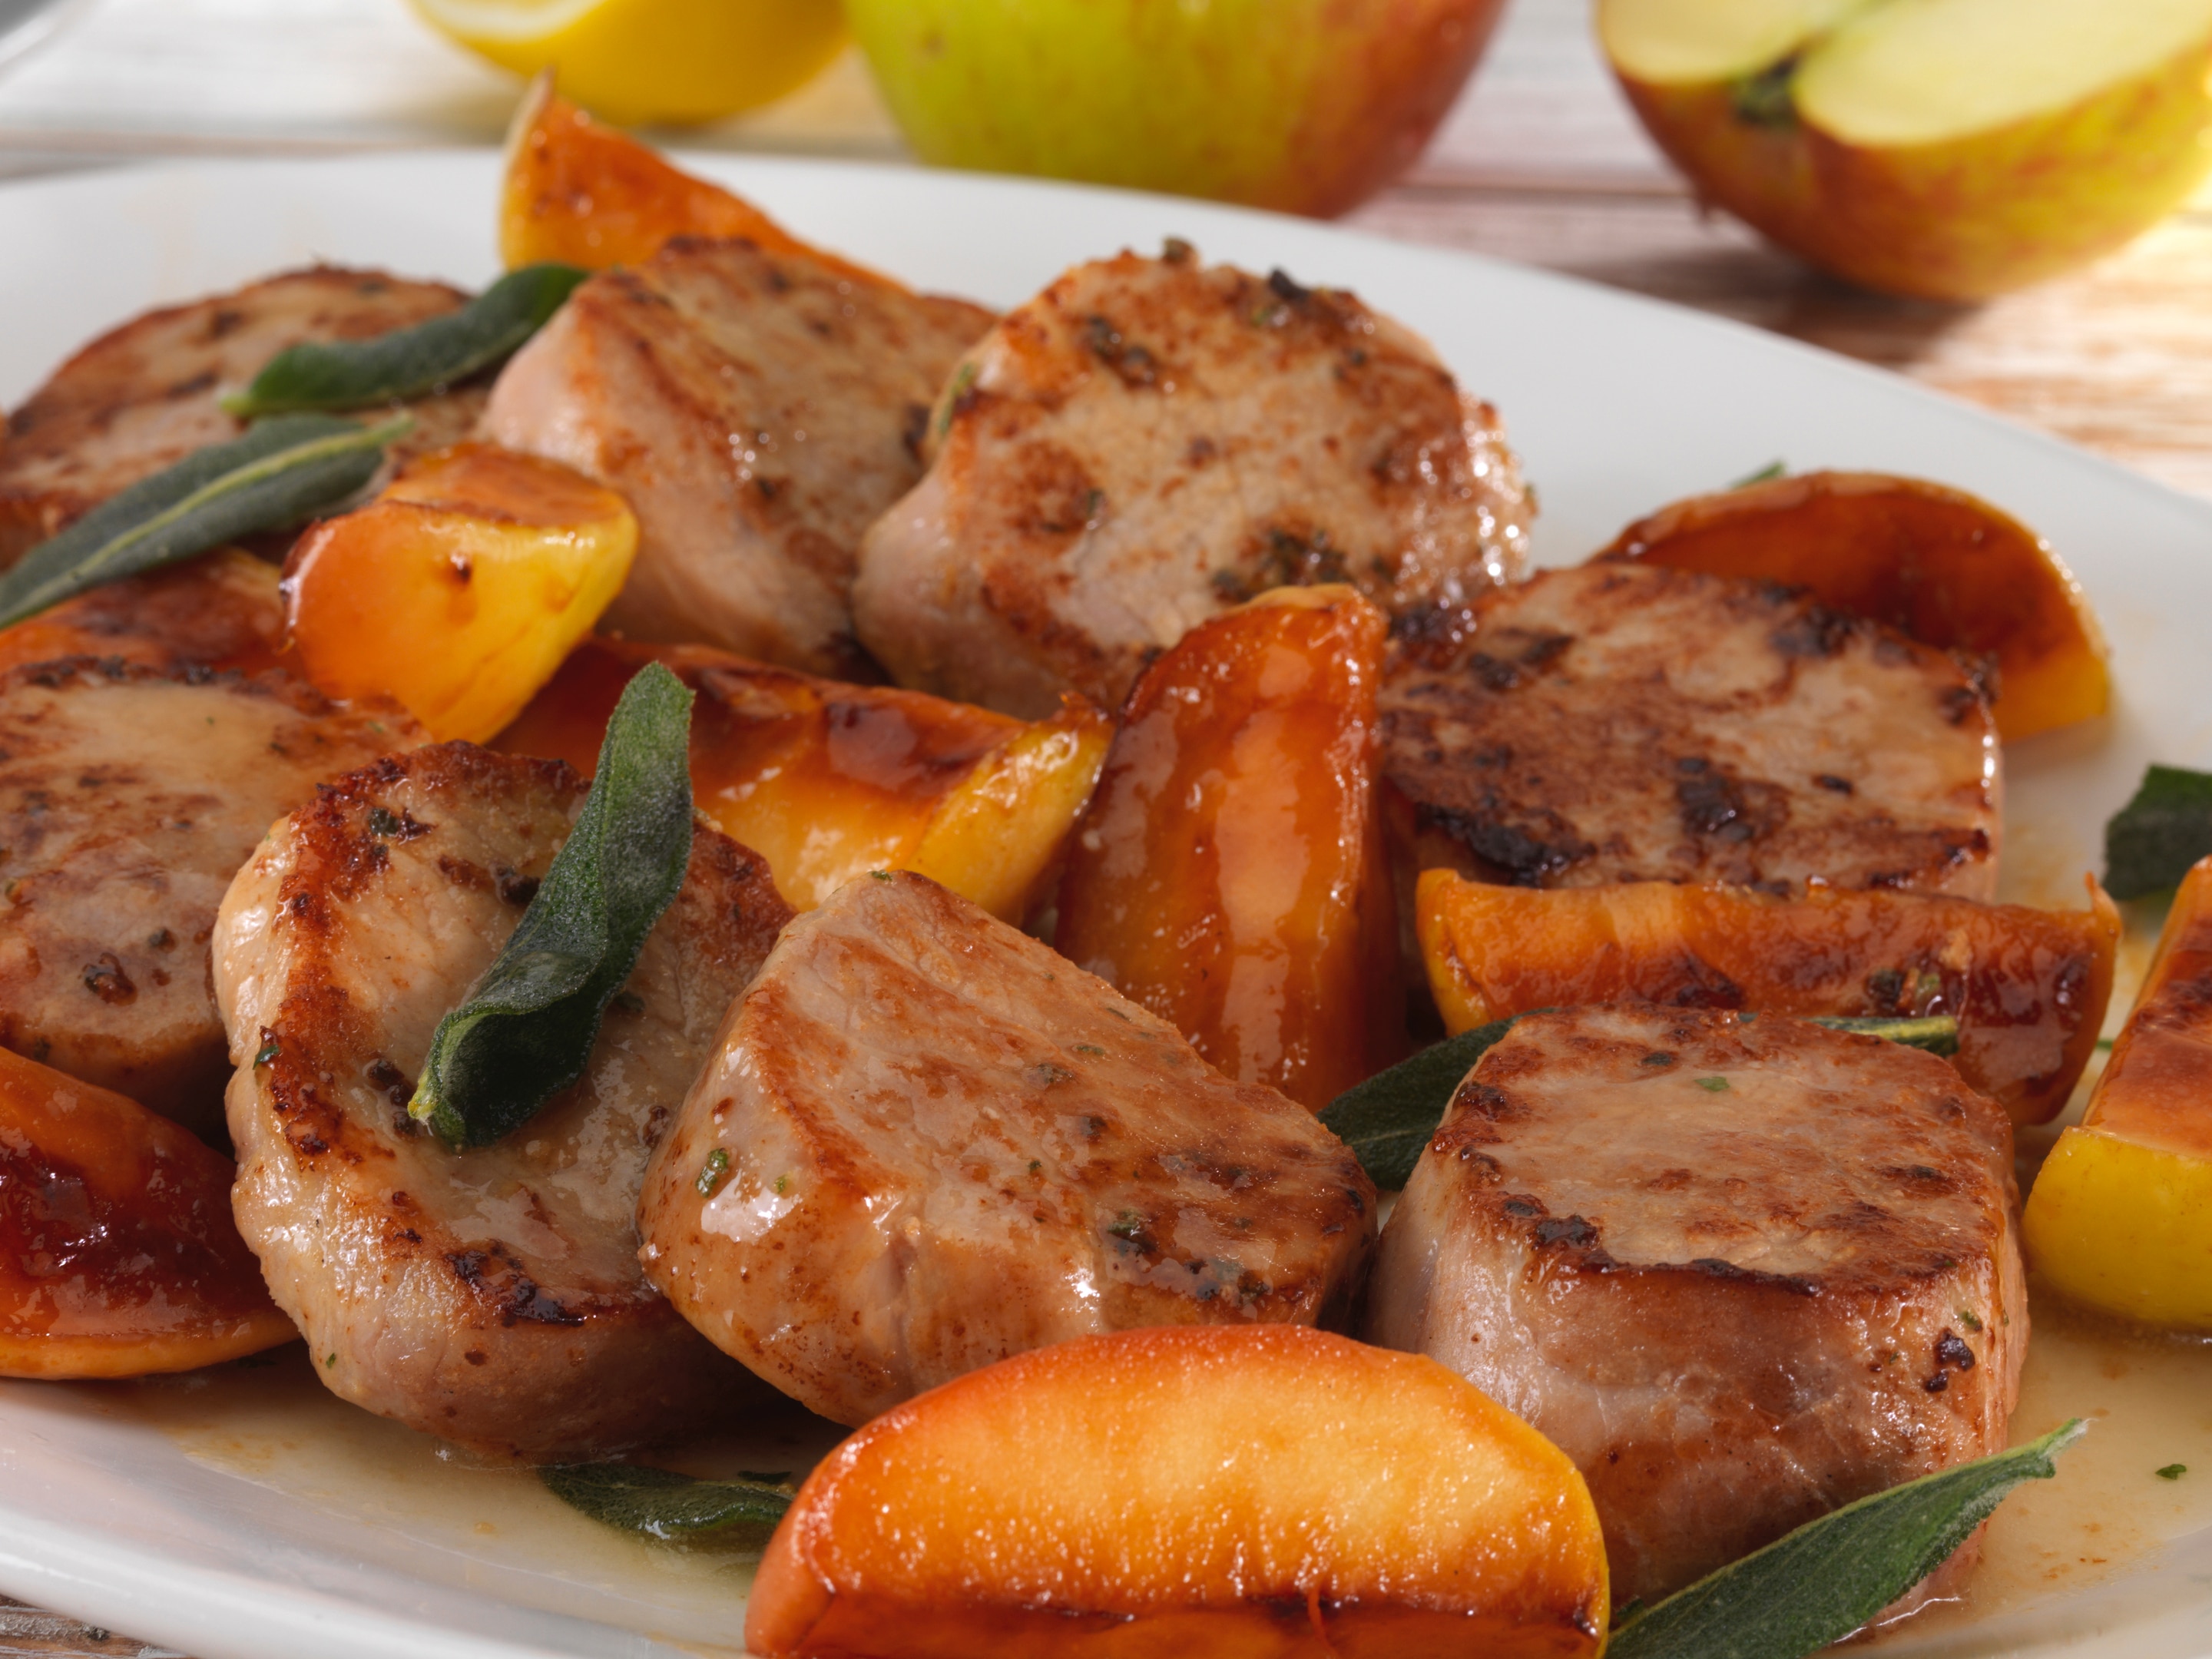 Pork medallions with caramelised apples and creamy sauce